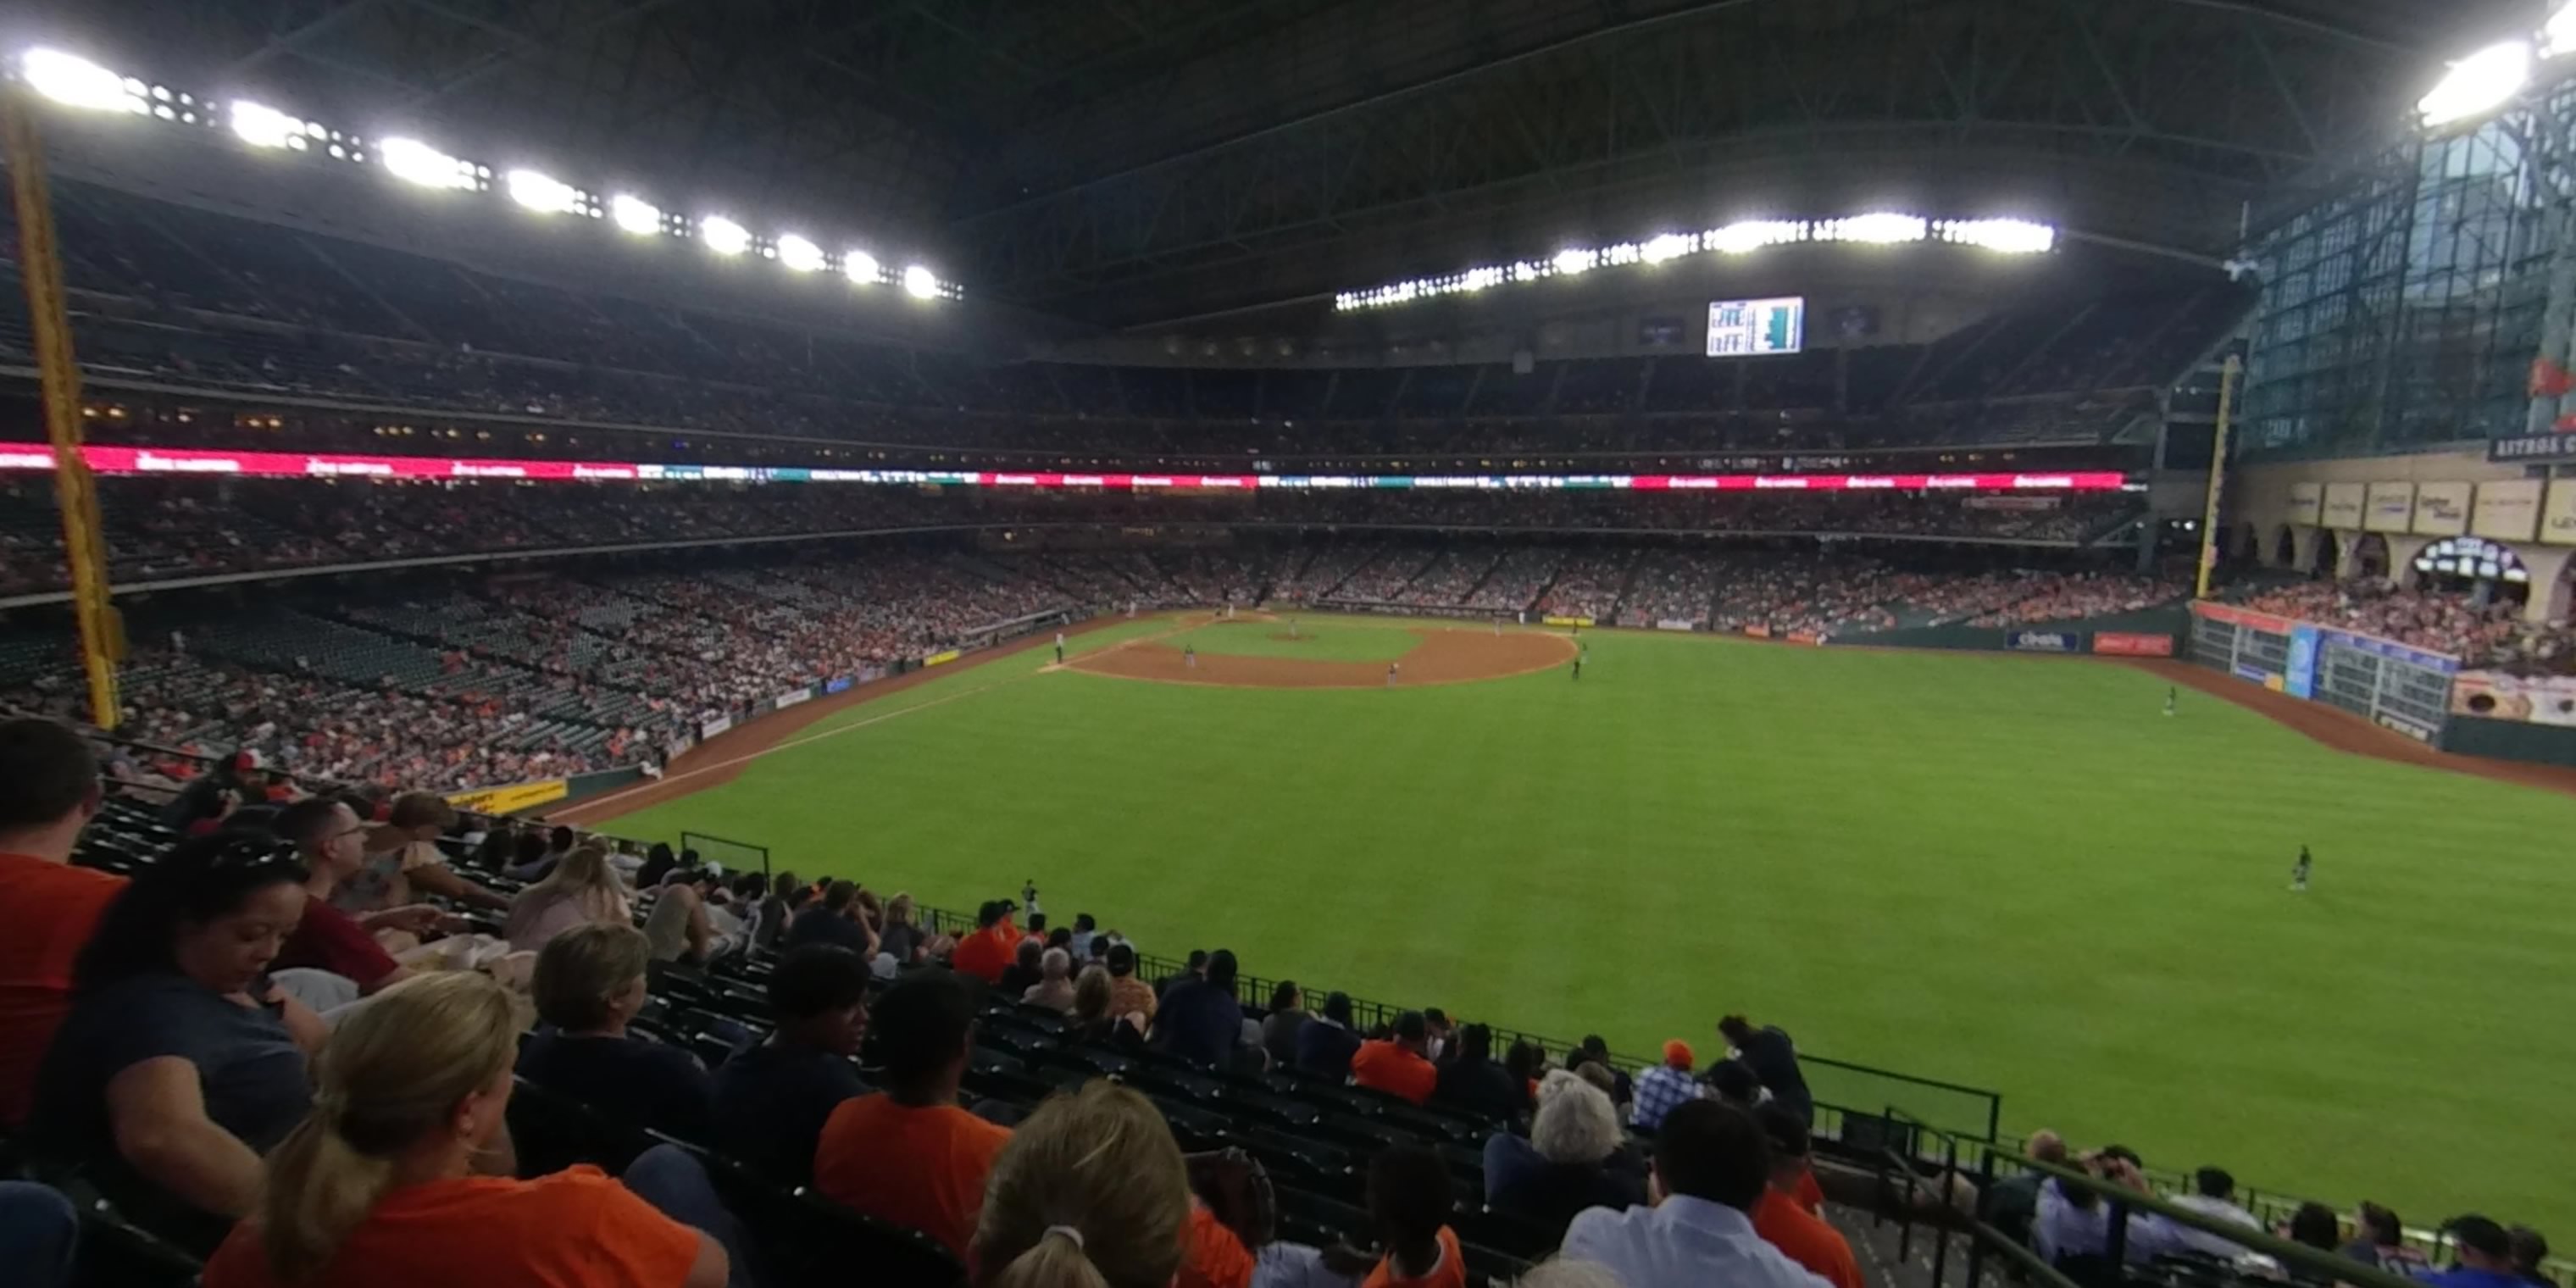 Section 255 at Minute Maid Park 